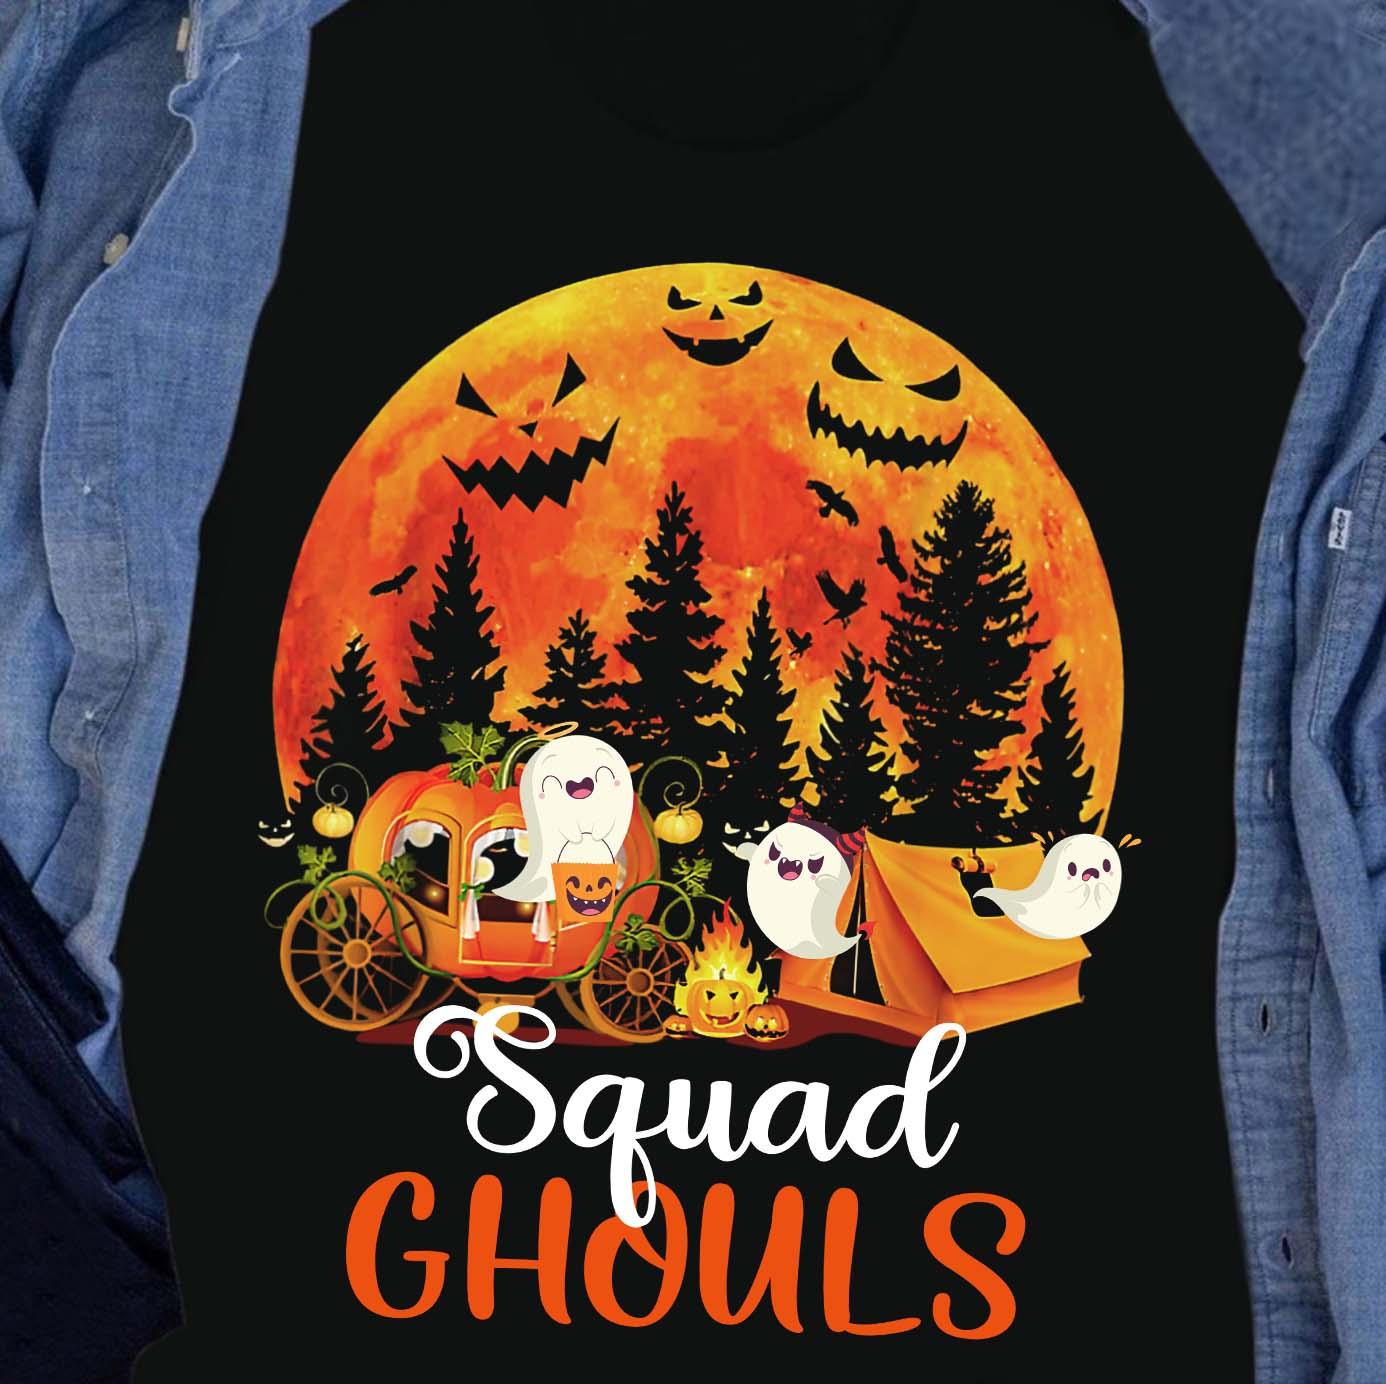 Halloween Camping Gift, Spooky White Ghost - Squad ghouls